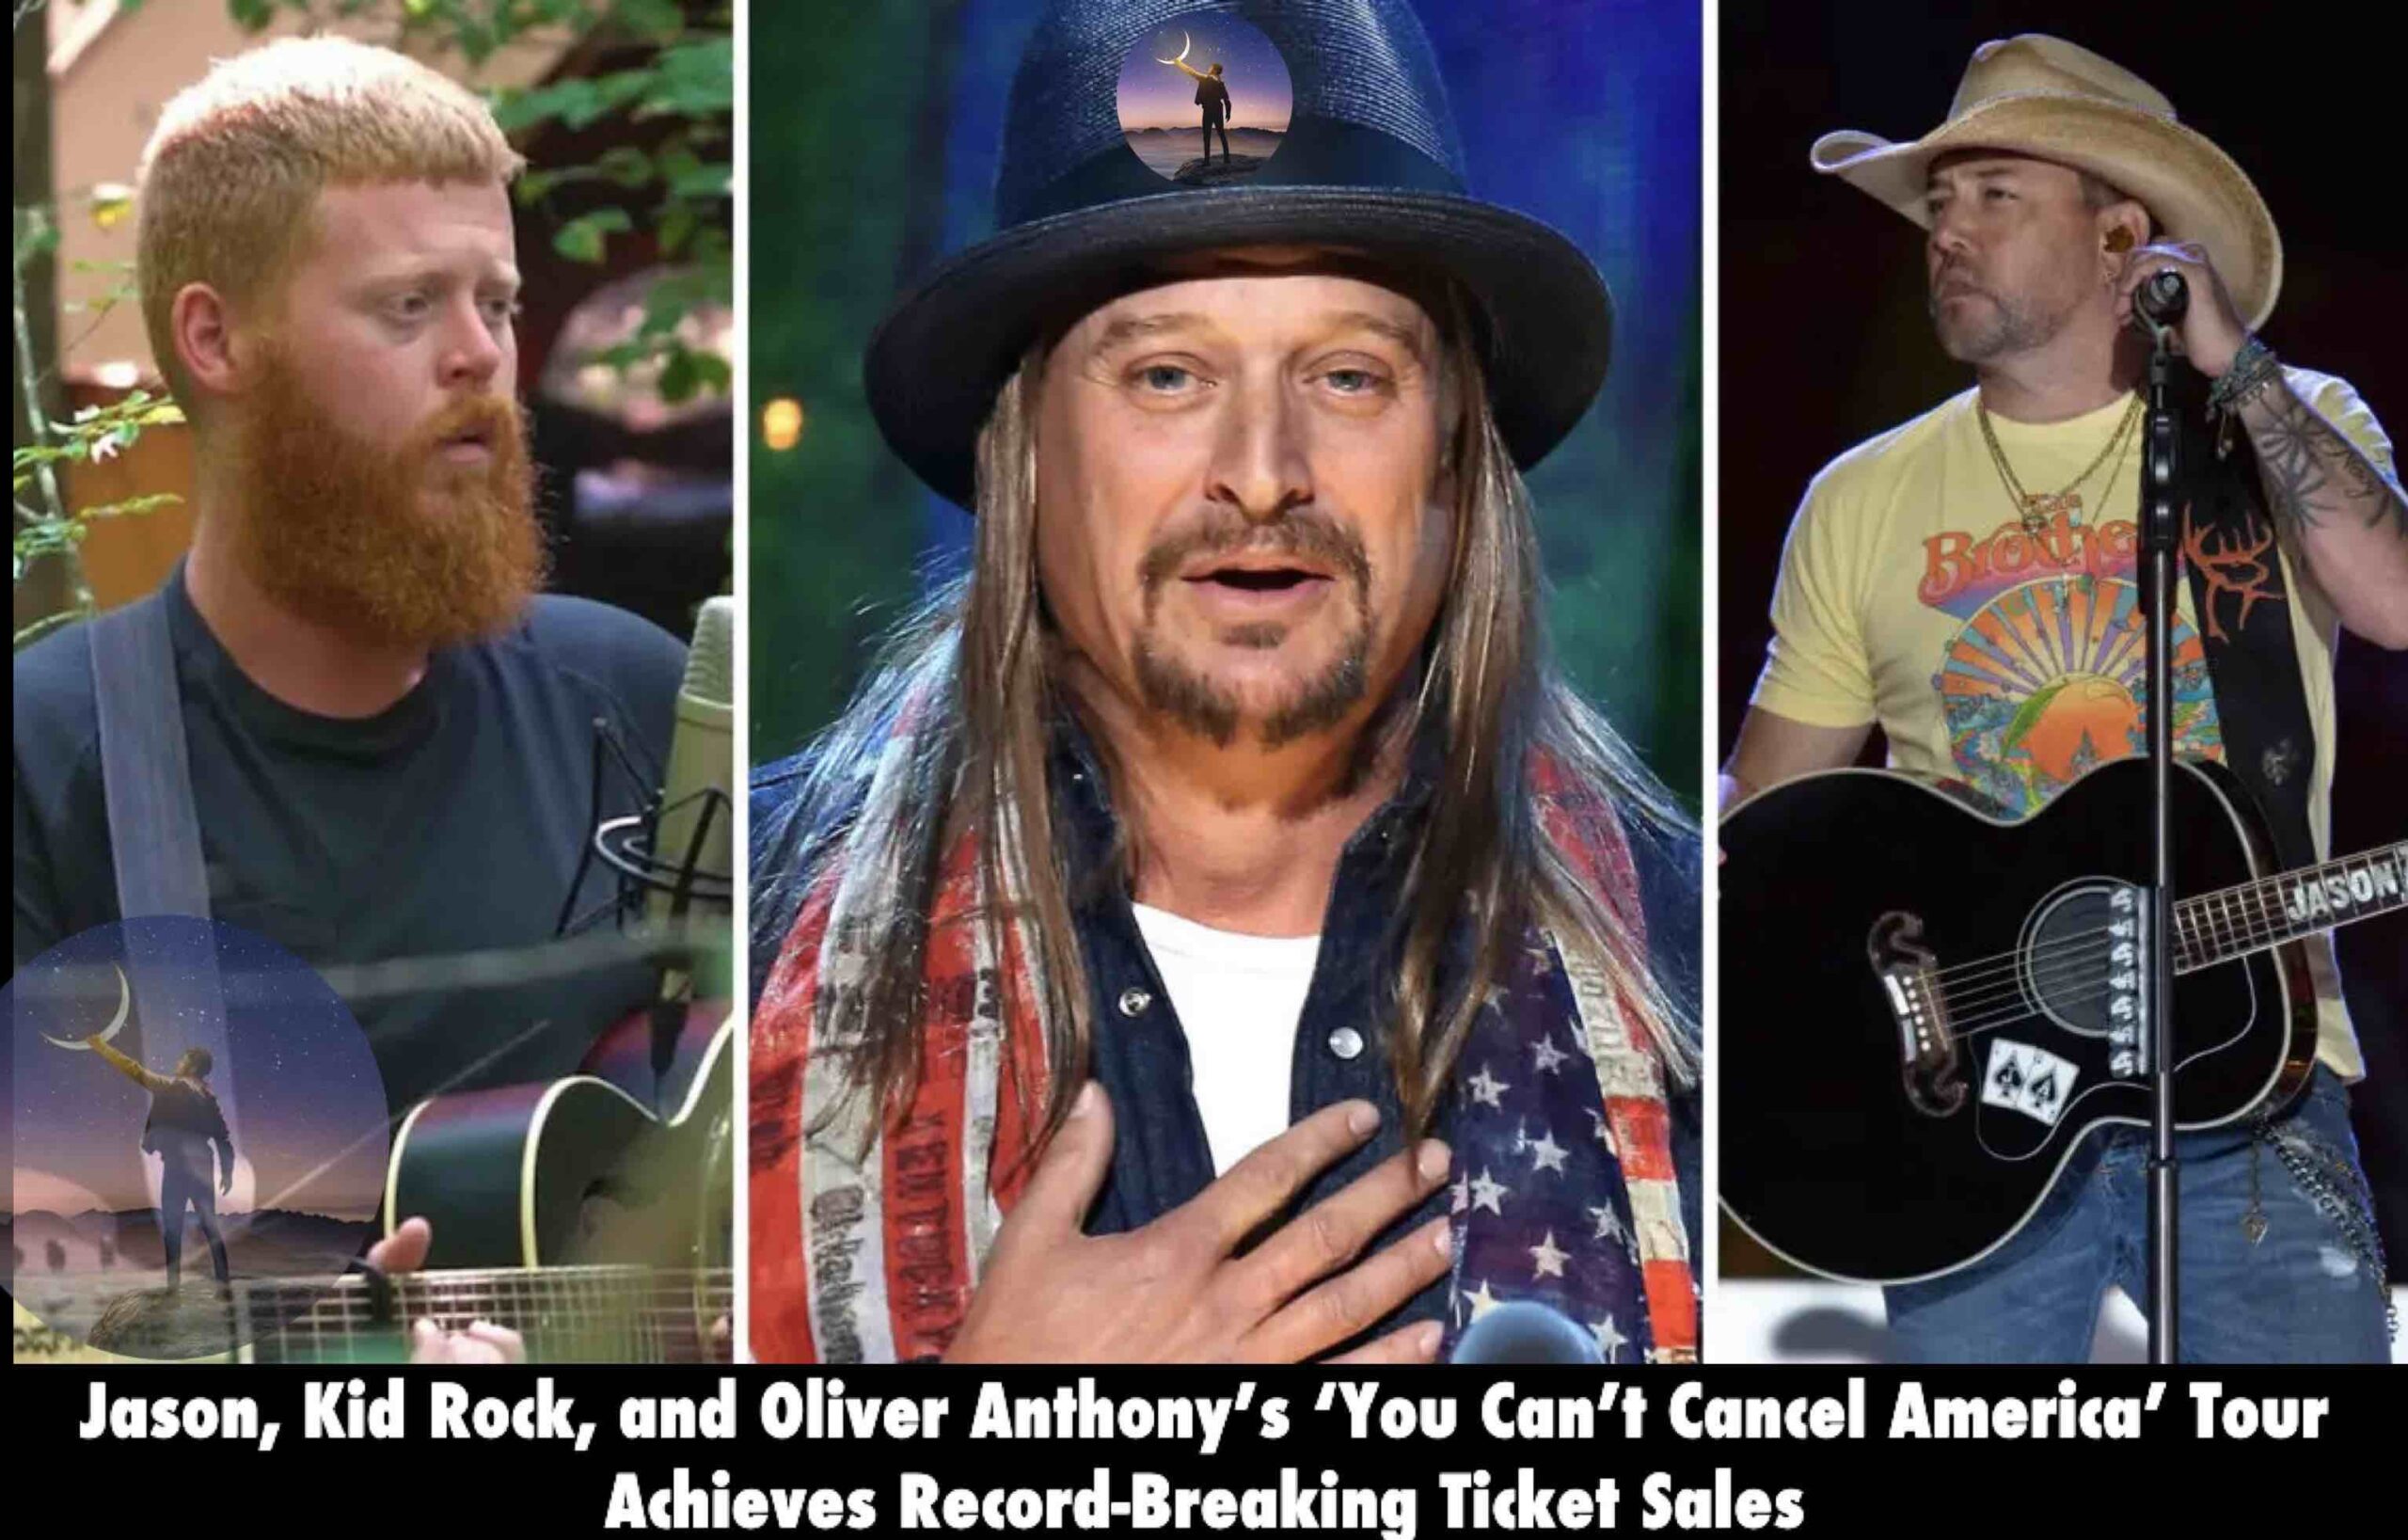 Jason, Kid Rock, and Oliver Anthony’s ‘You Can’t Cancel America’ Tour Achieves Record-Breaking Ticket Sales